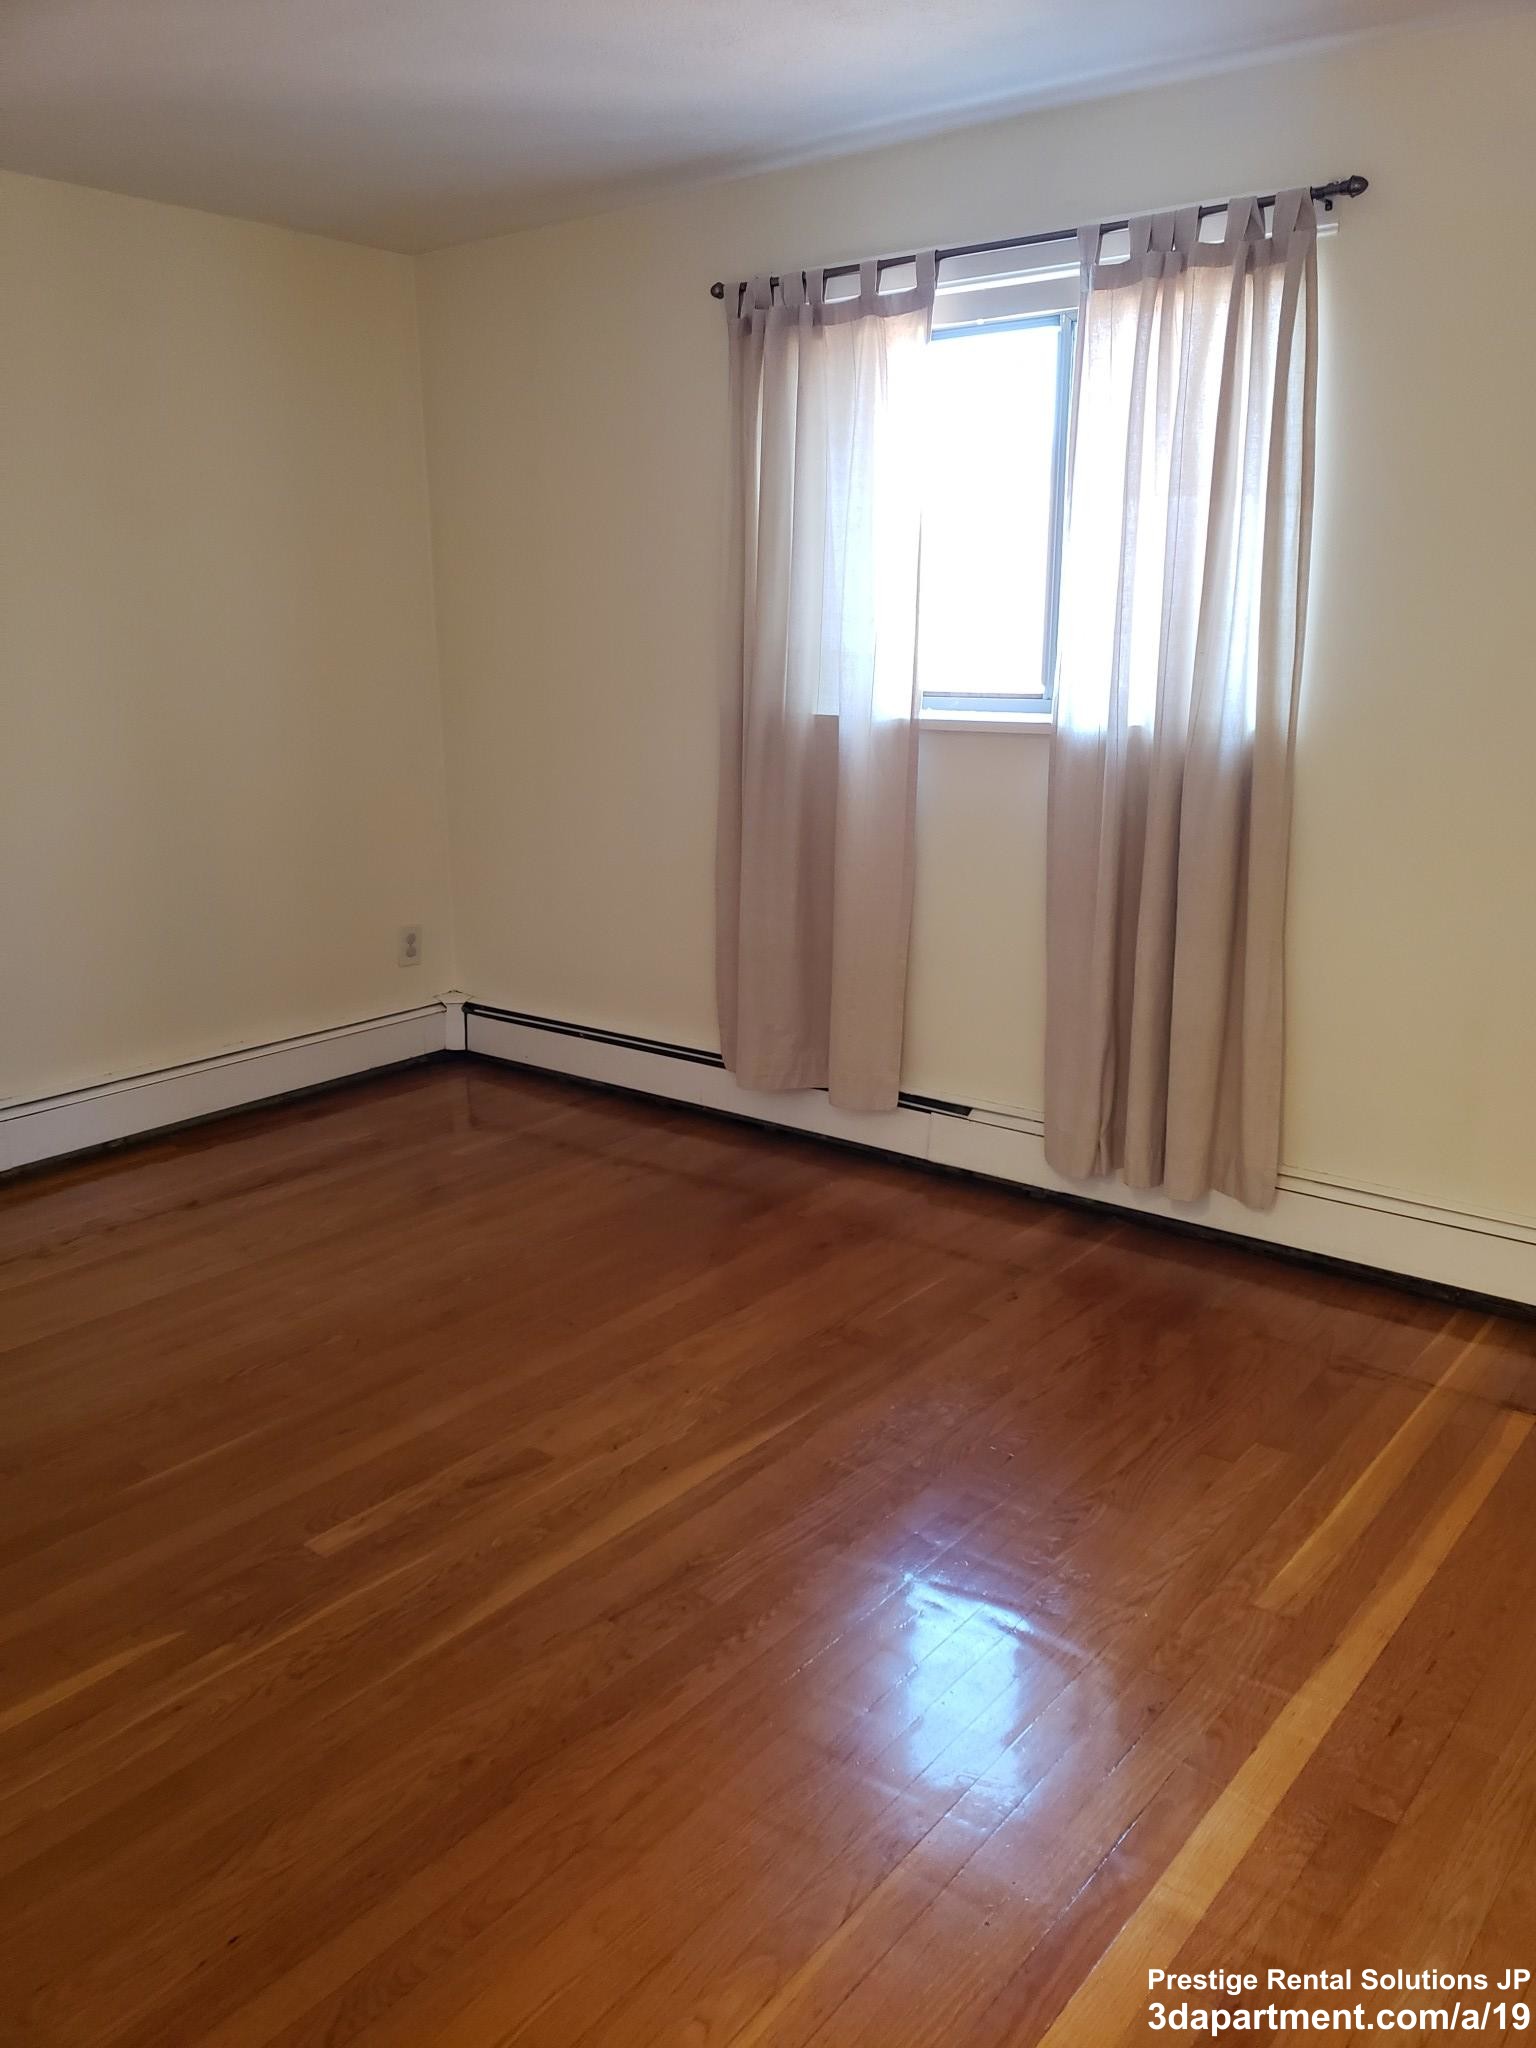 Photos of apartment on riverside St.,Watertown MA 02472